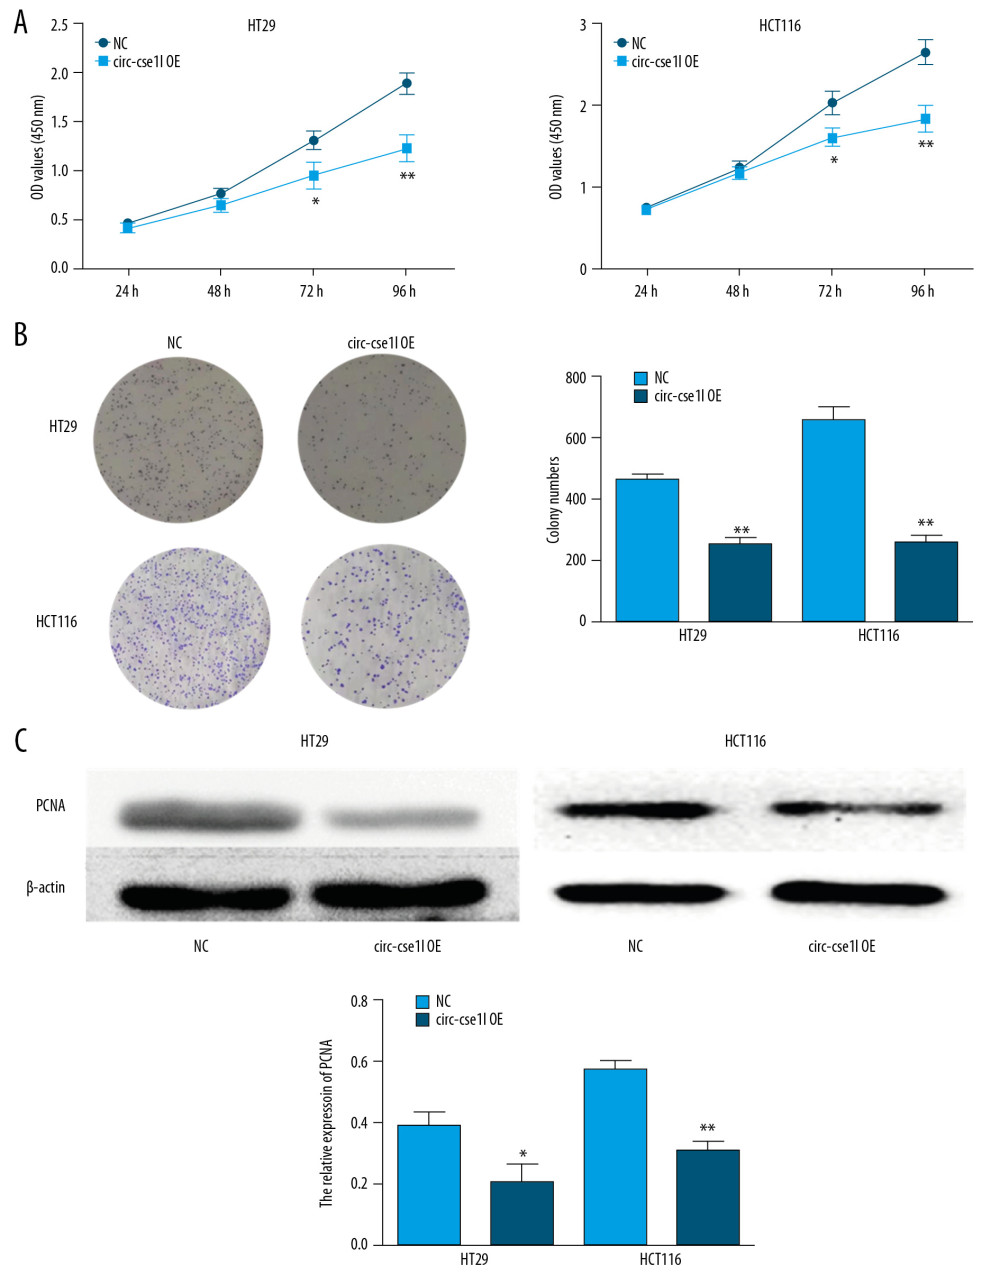 Overexpression of circ_cse1l inhibits CRC cell proliferation while reducing PCNA expression. HT29 and HCT116 cells were transfected with a circ_cse1l overexpression vector and an empty vector (NC). (A) CCK-8 and (B) colony formation assays, showing that overexpression of circ_cse1l inhibited the proliferation of HT29 and HCT116 cells. (C) Western blotting experiments, showing that circ_cse1l overexpression reduced the expression of PCNA protein in HT29 and HCT116 cells. * P<0.05, ** P<0.01.